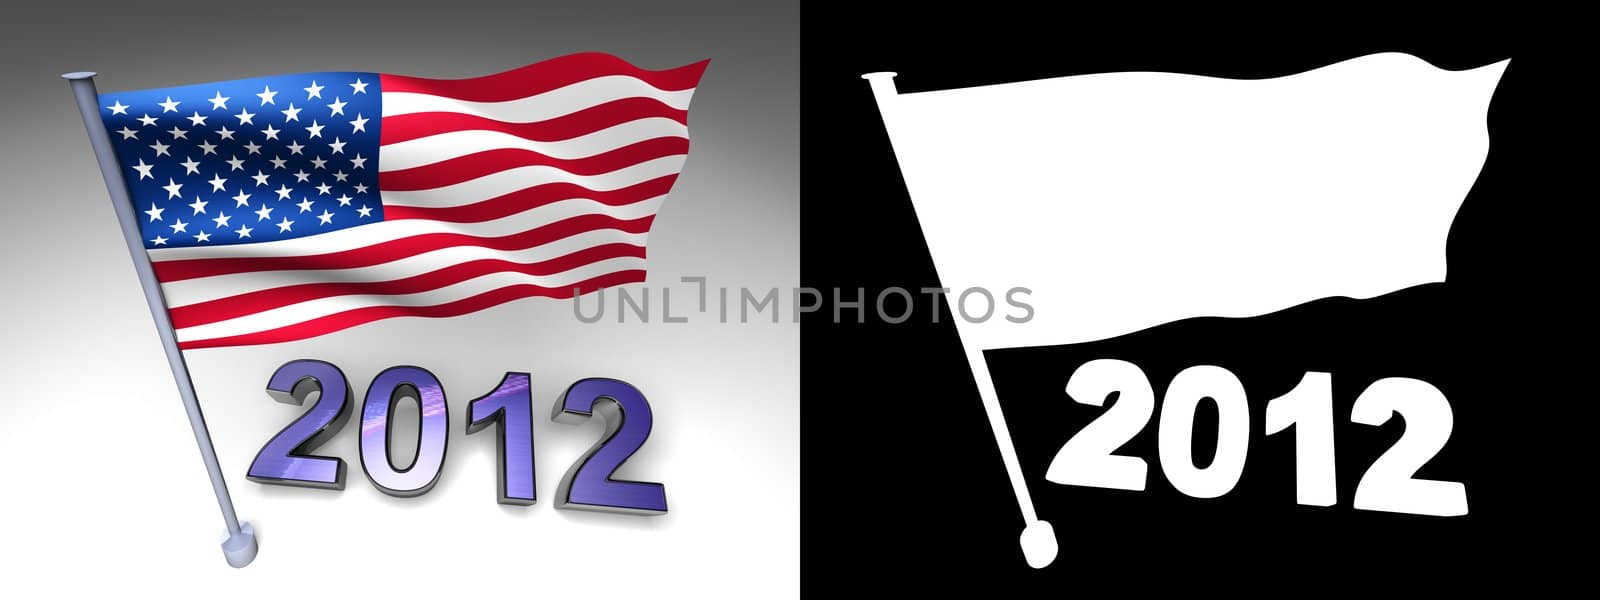 2012 design and USA flag on a pole by shkyo30